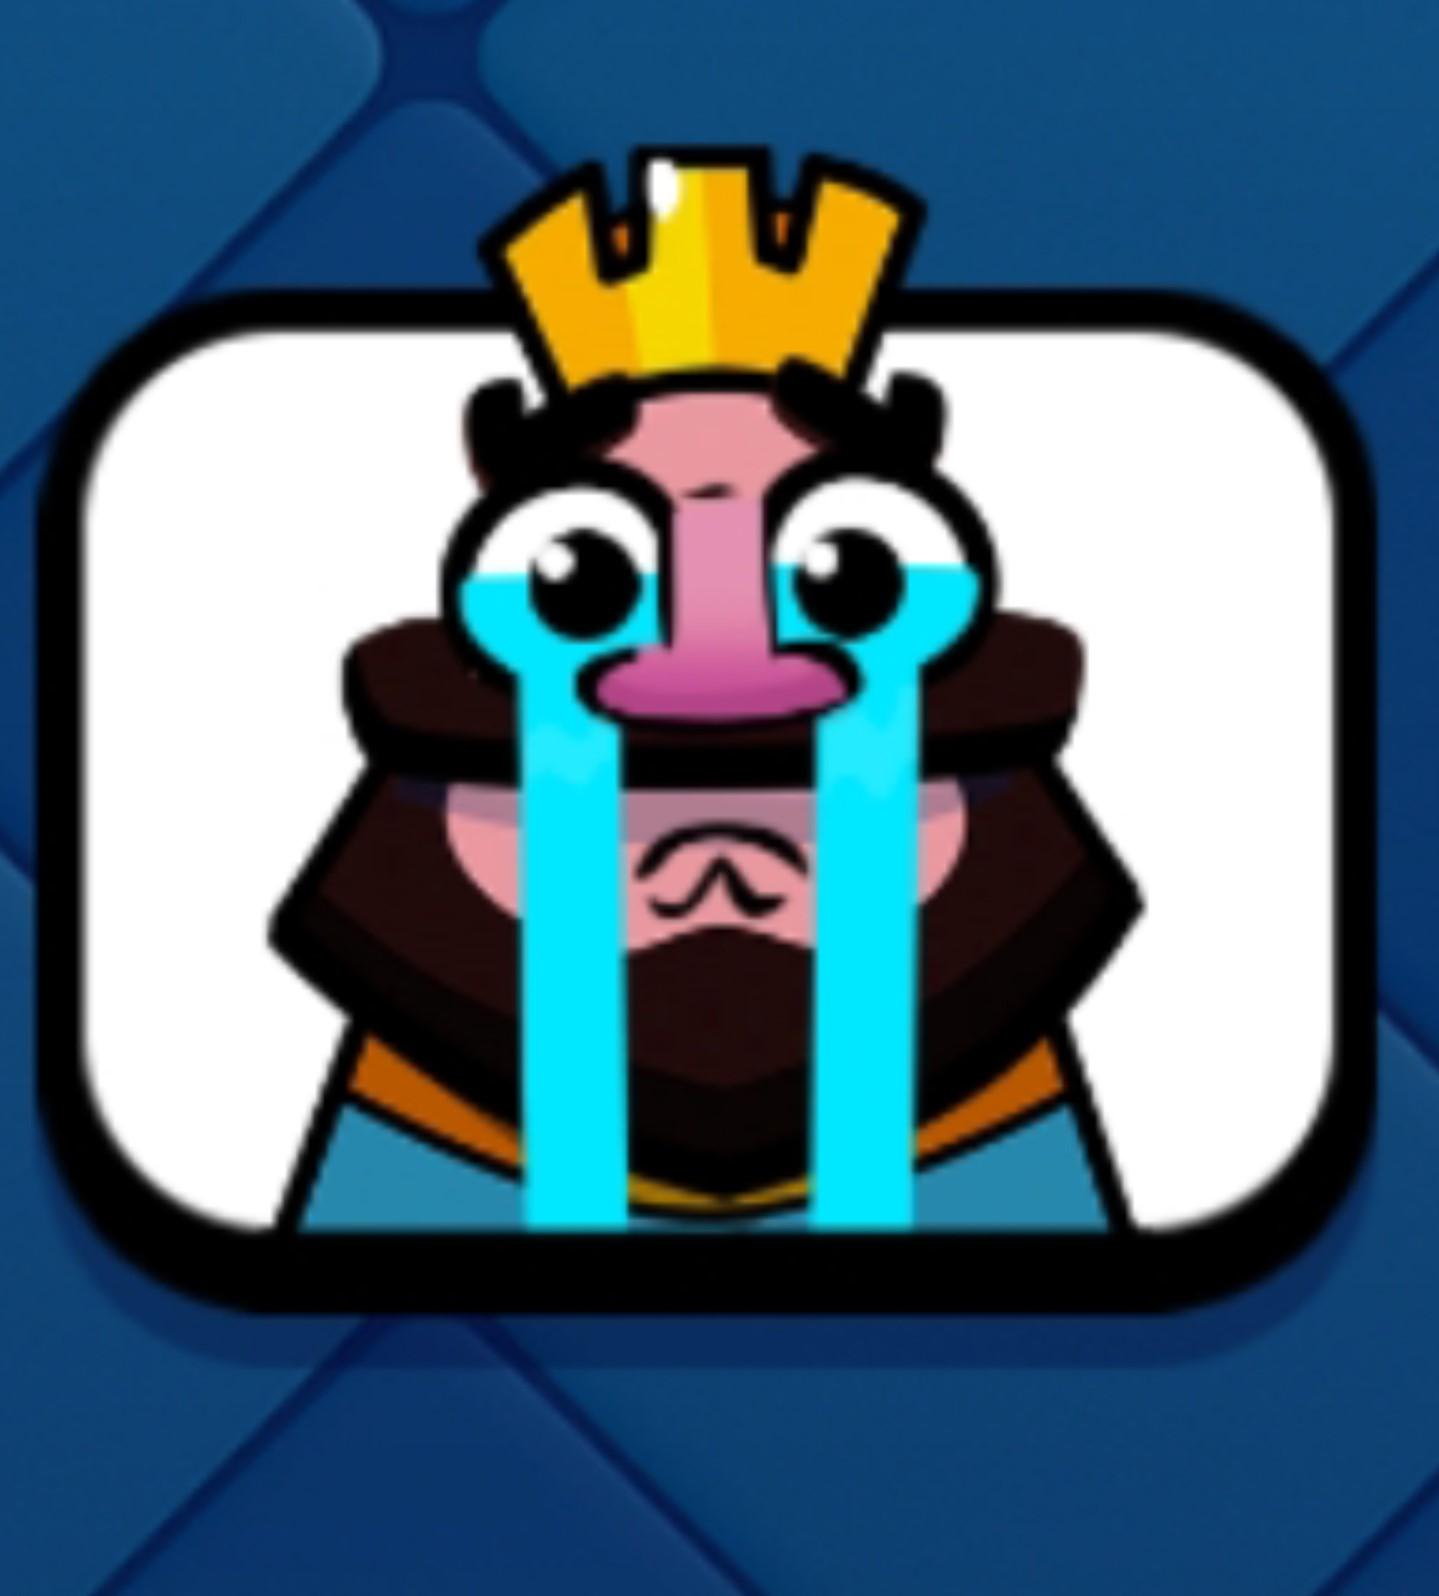 Crying King Emote from Clash Royale 3d model